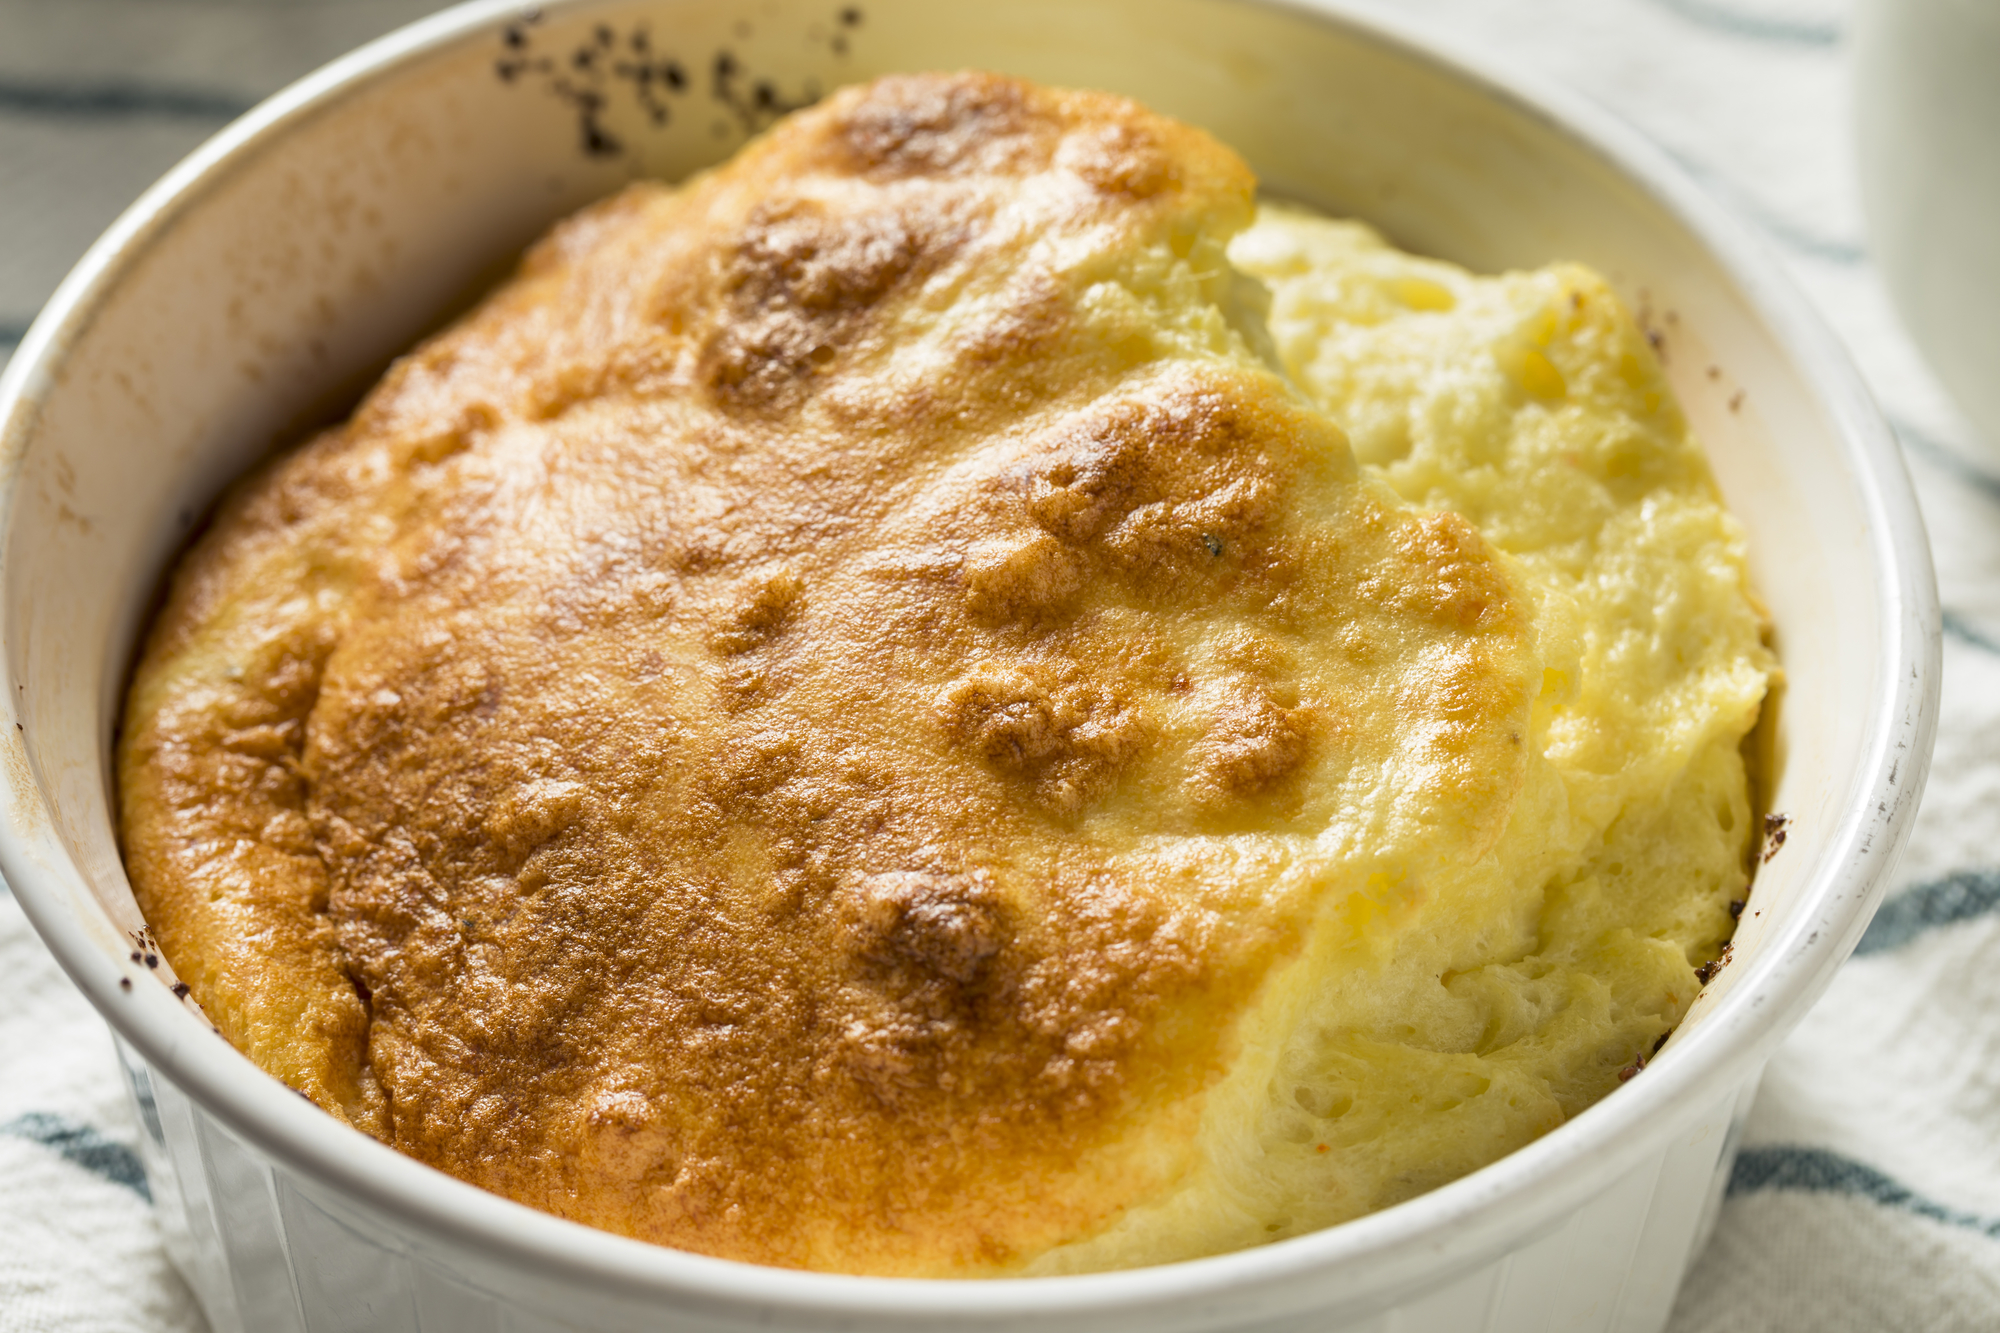 Homemade Egg and Cheese Souffle